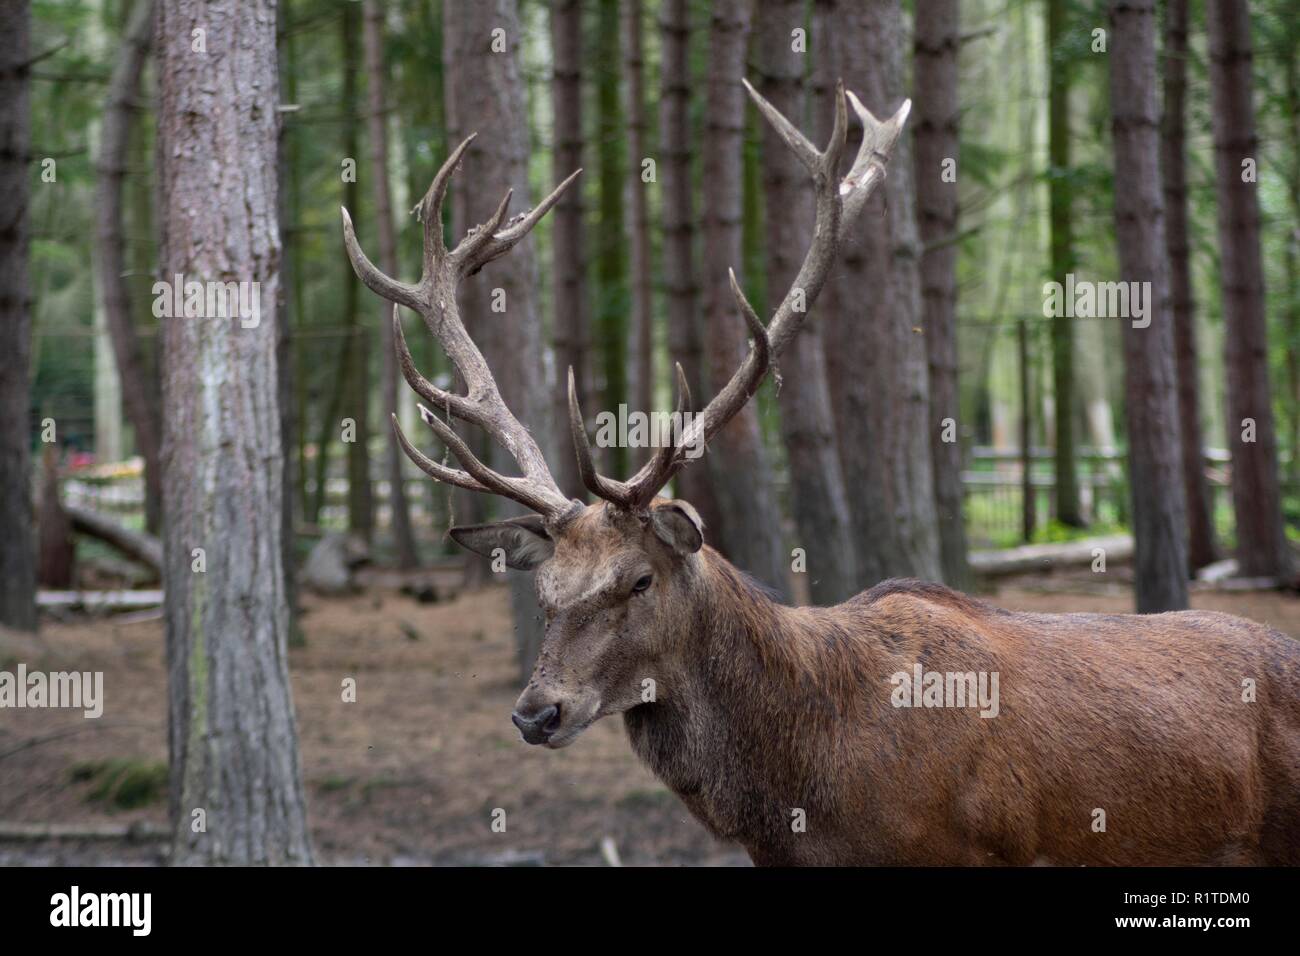 Male red deer at wildwood trust Stock Photo